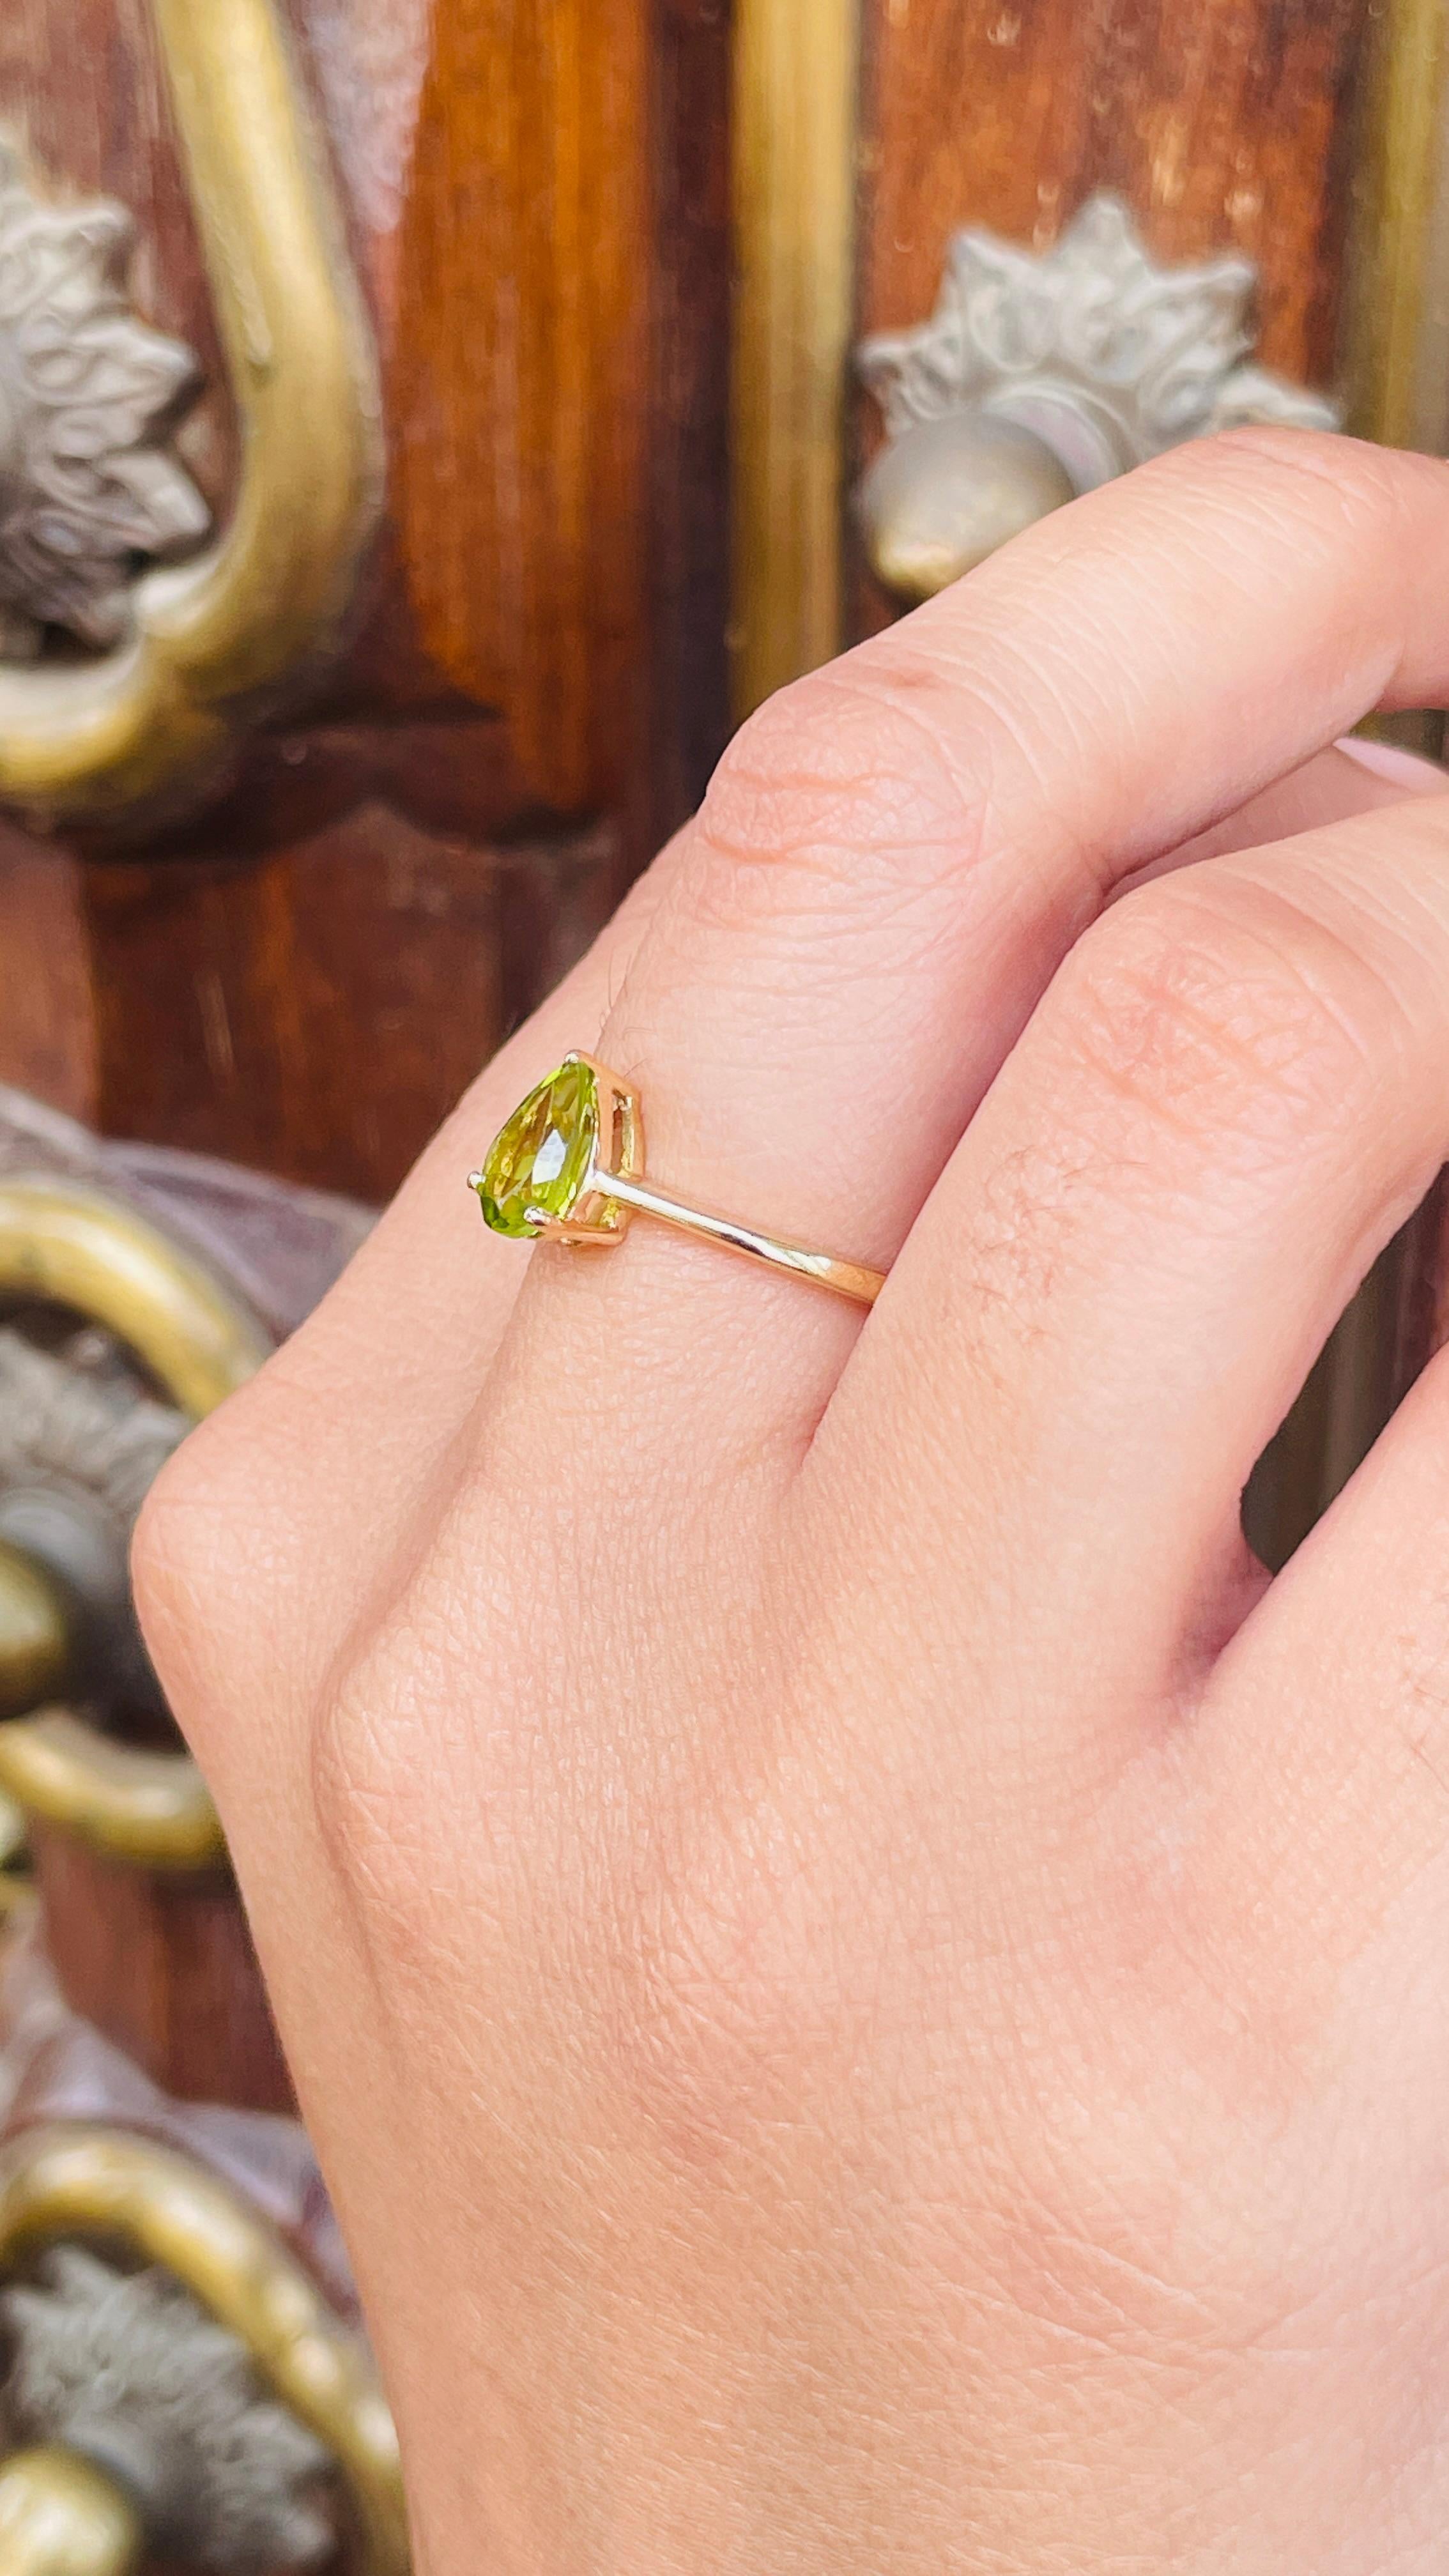 For Sale:  Pear Cut Peridot Solitaire Ring in 14K Yellow Gold 4